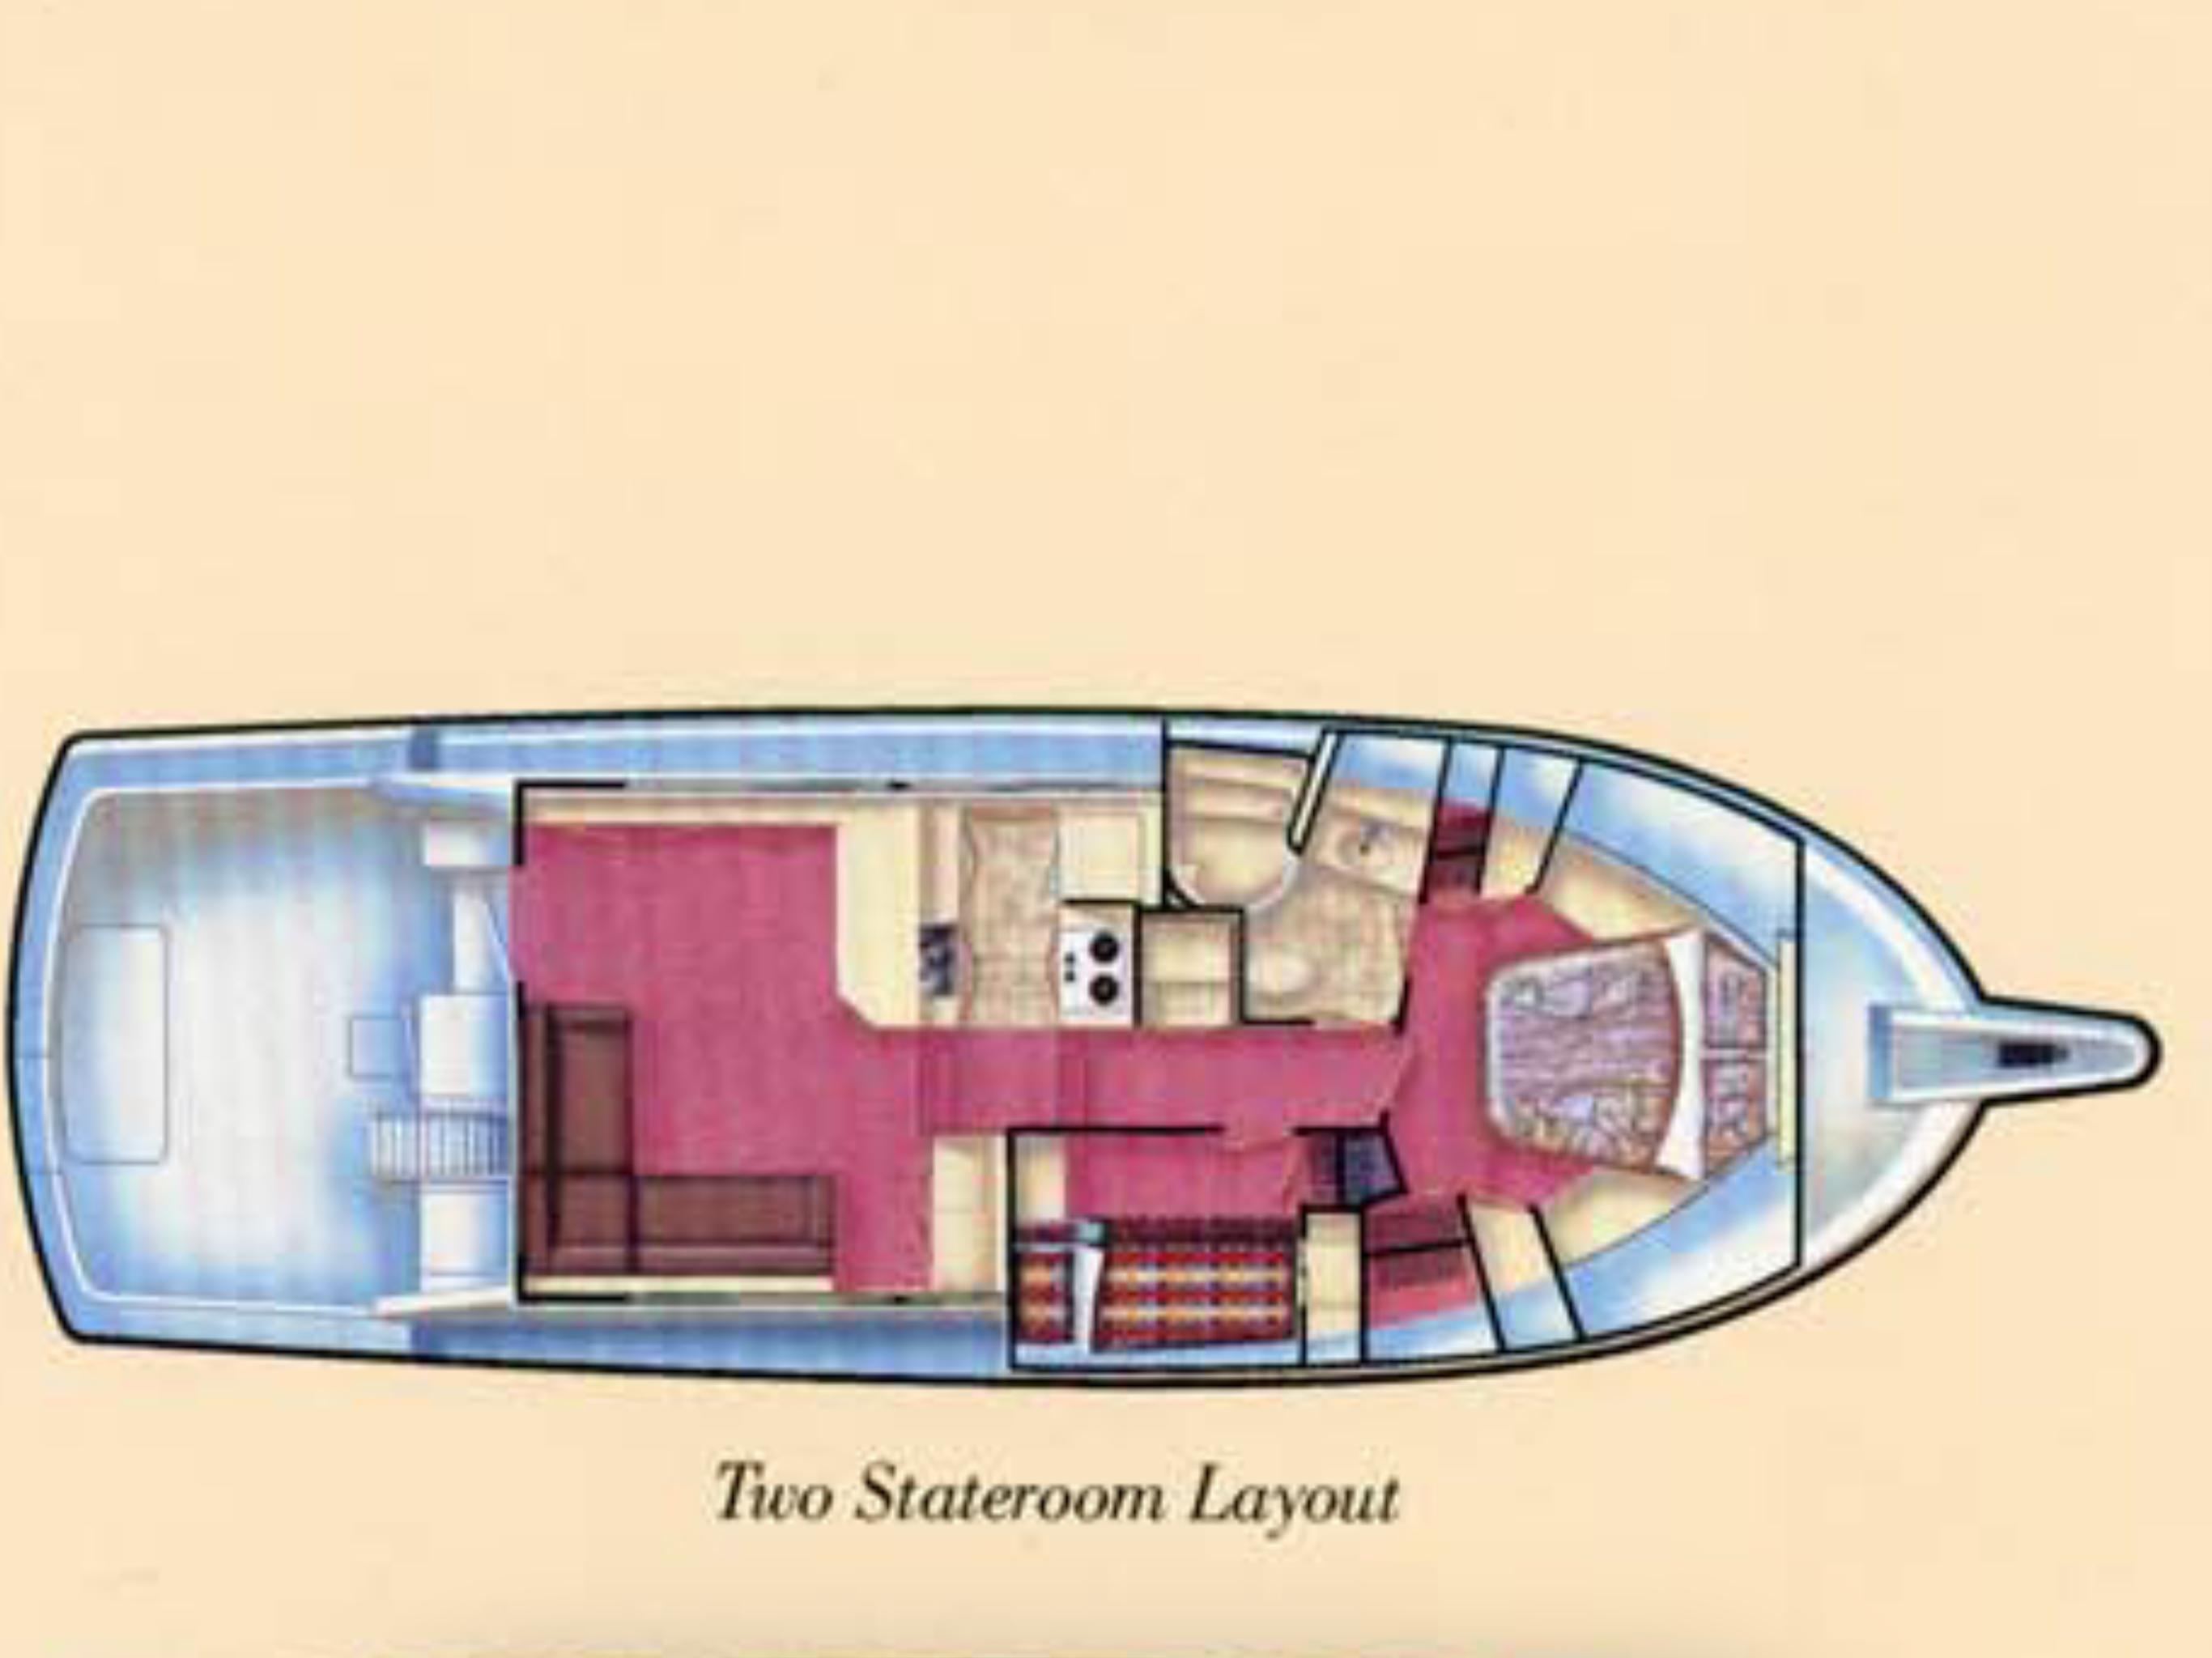 Two Stateroom Layout